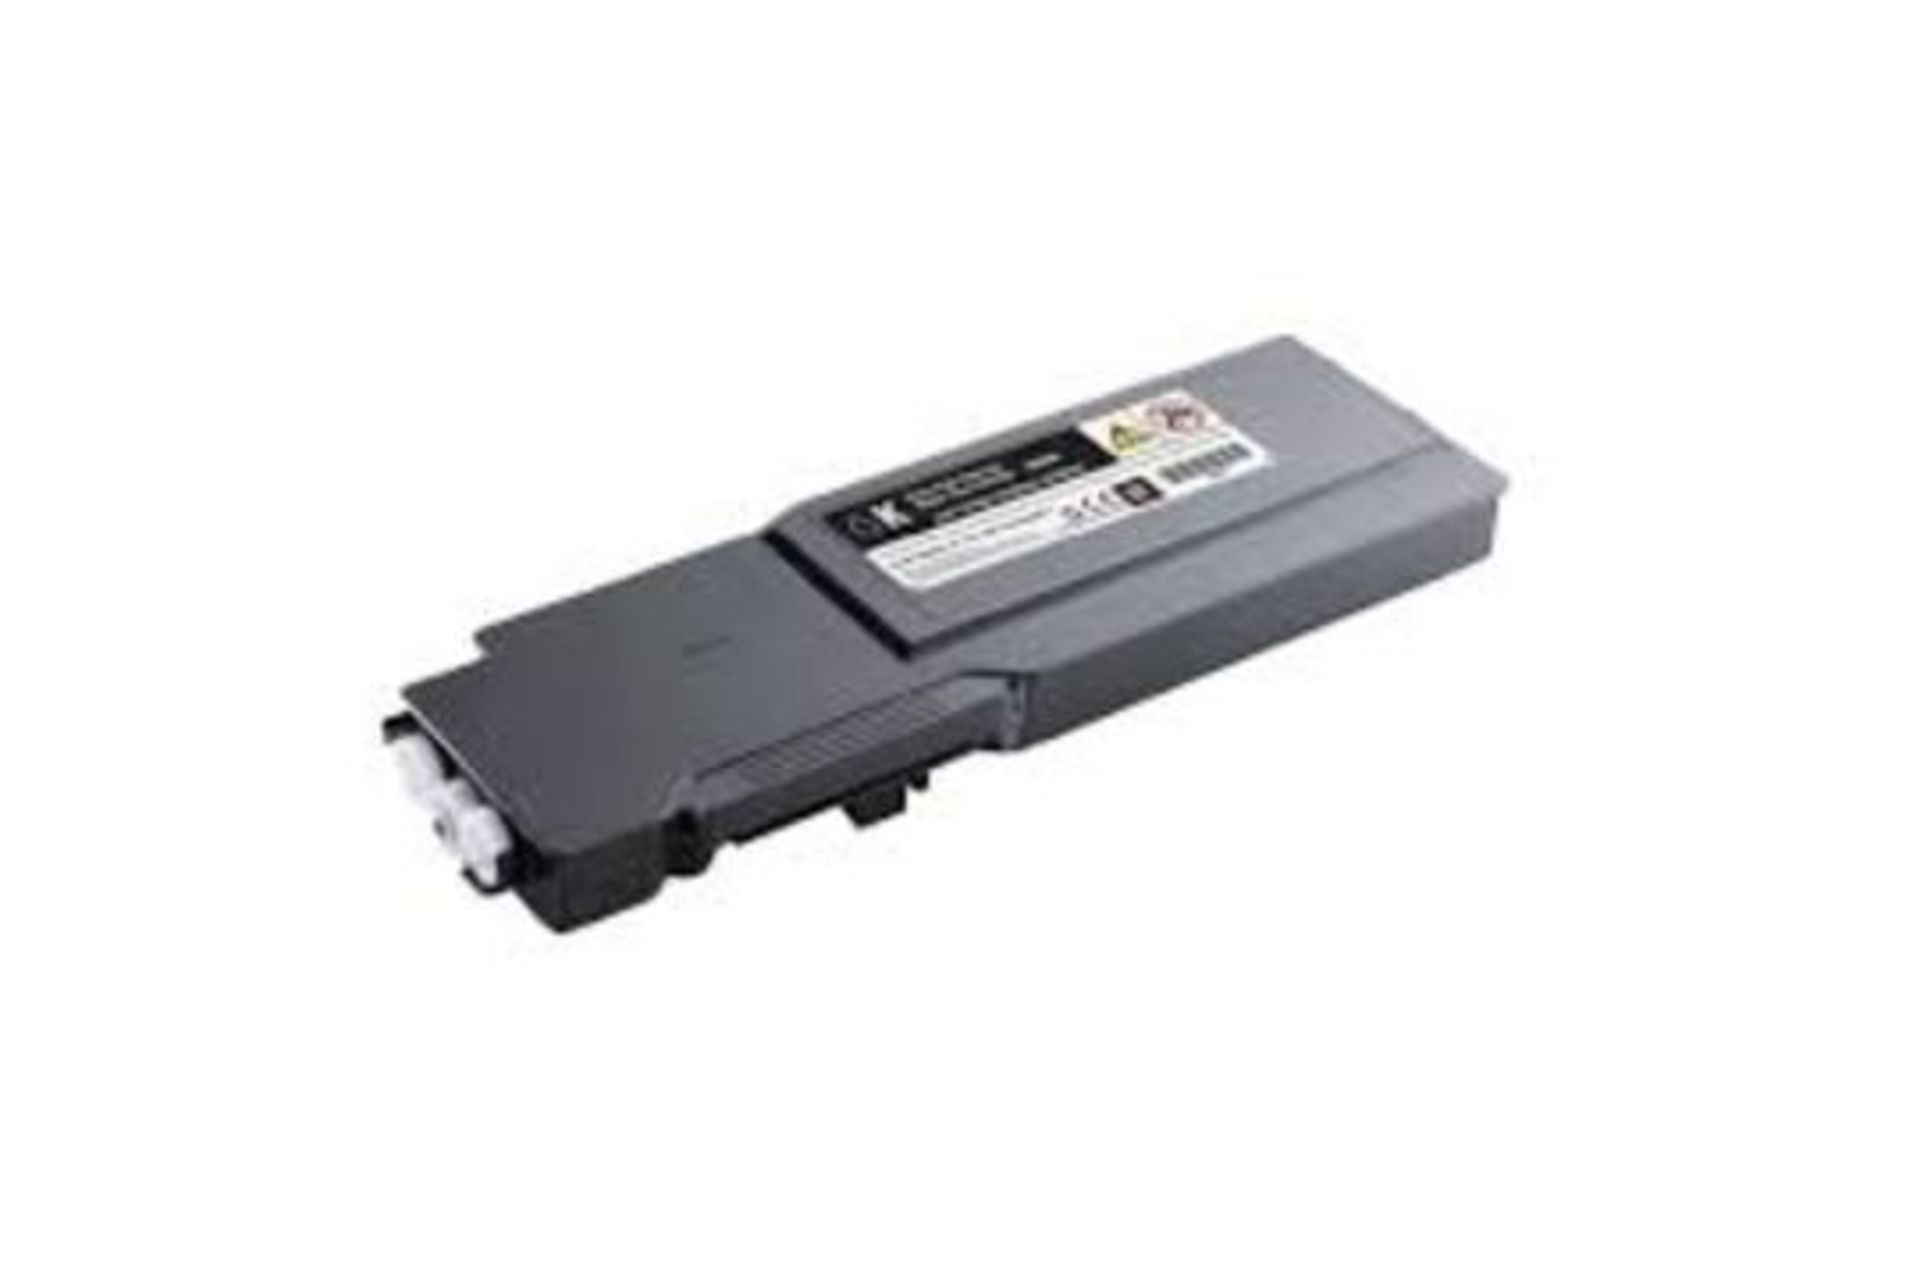 MAJOR LIQUIDATION OF CIRCA 16000 PRINTER CARTRIDGES/TONERS COMPATIBLE WITH BROTHER, EPSON, HP, CANON - Image 2 of 9